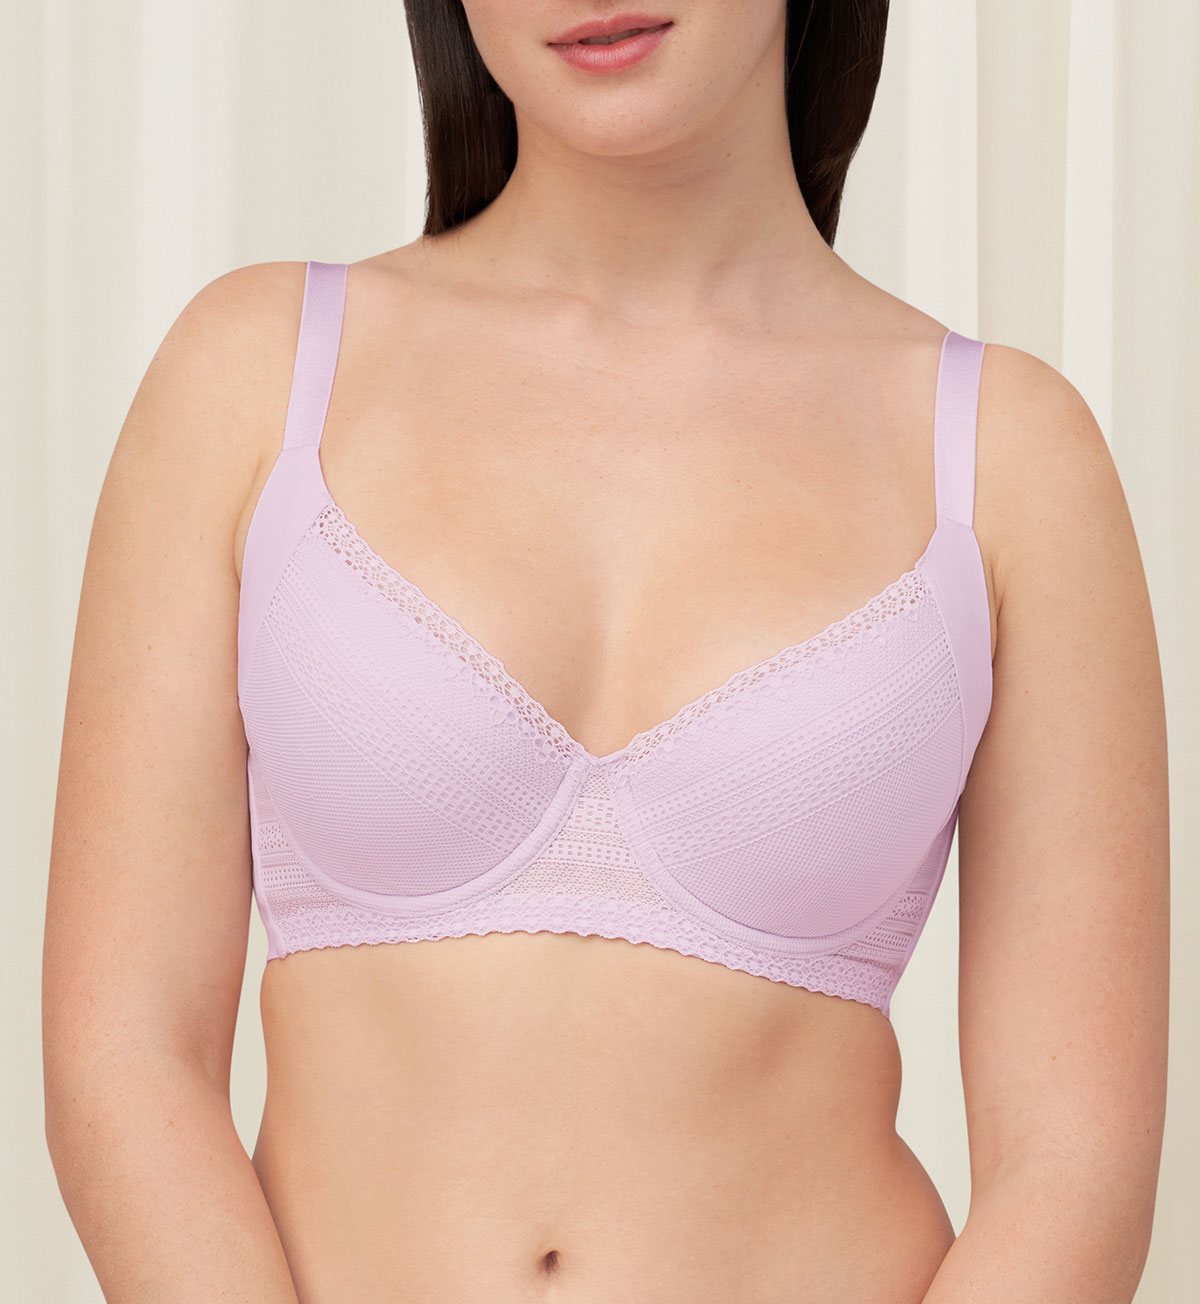 42C Naturana Sidesmoother Bra Women's Non-Wired Padded Soft Cup Bra, Blue -  Helia Beer Co